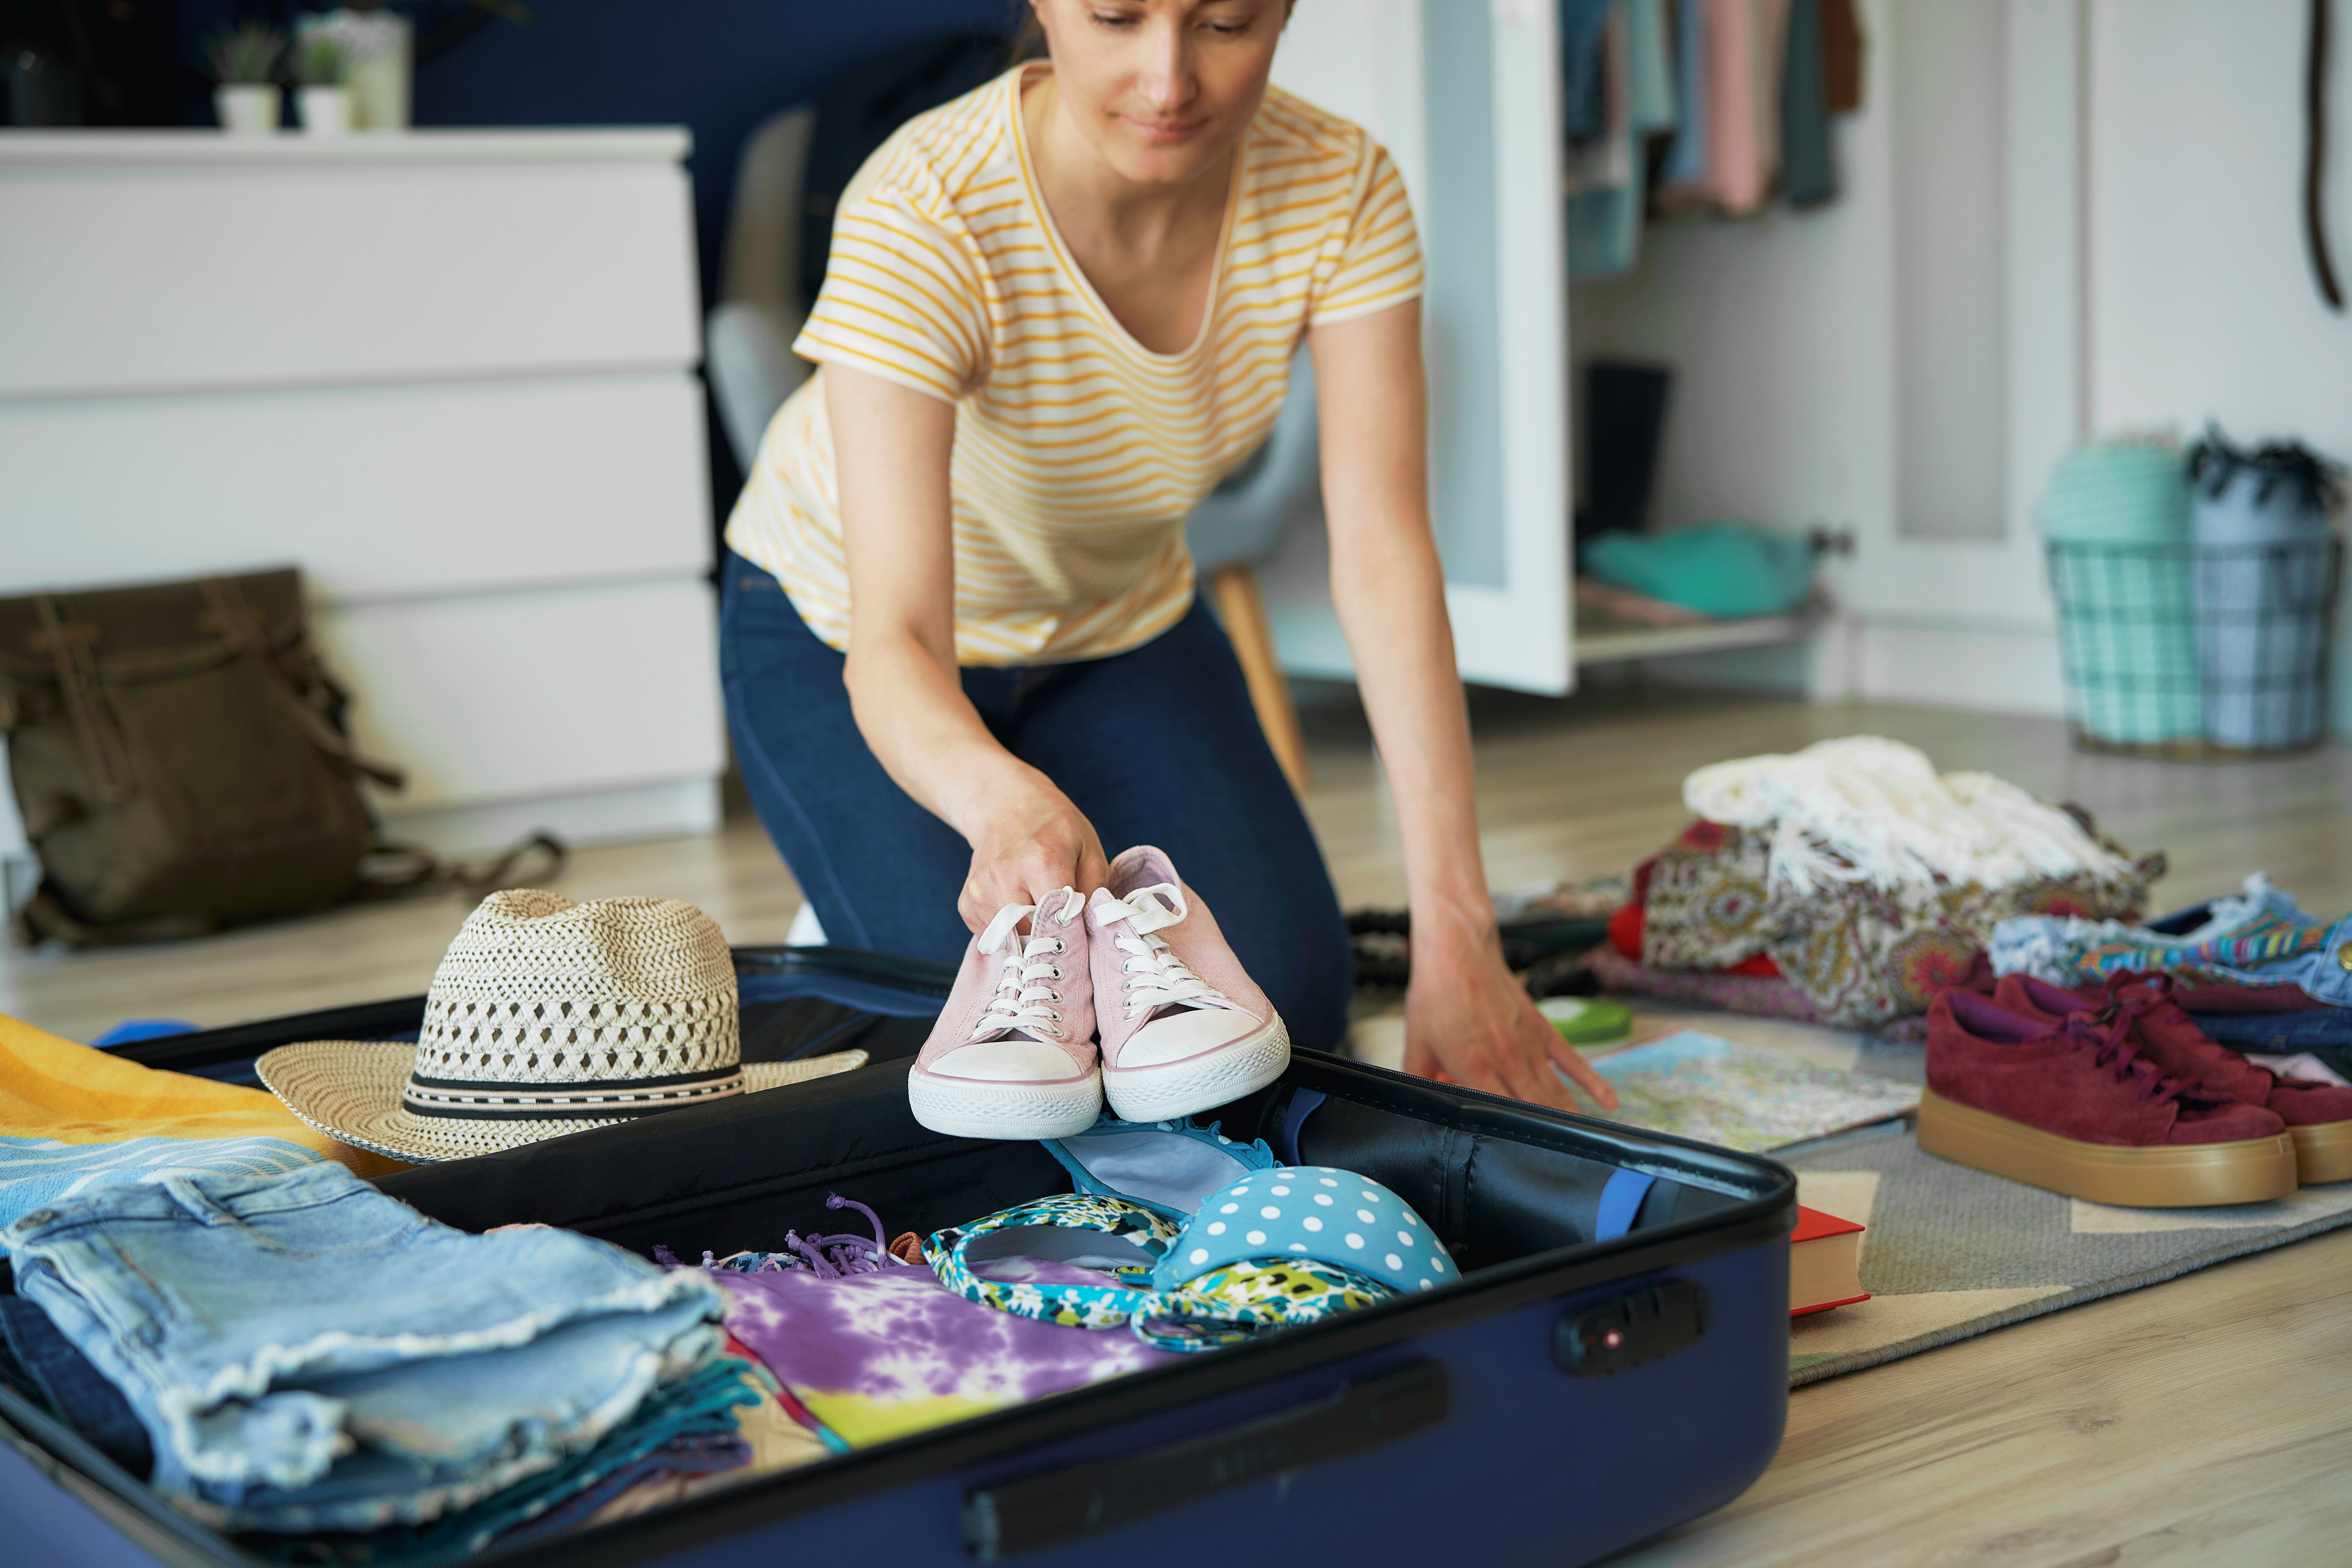 6 Items You Should Pack for a Summer Abroad